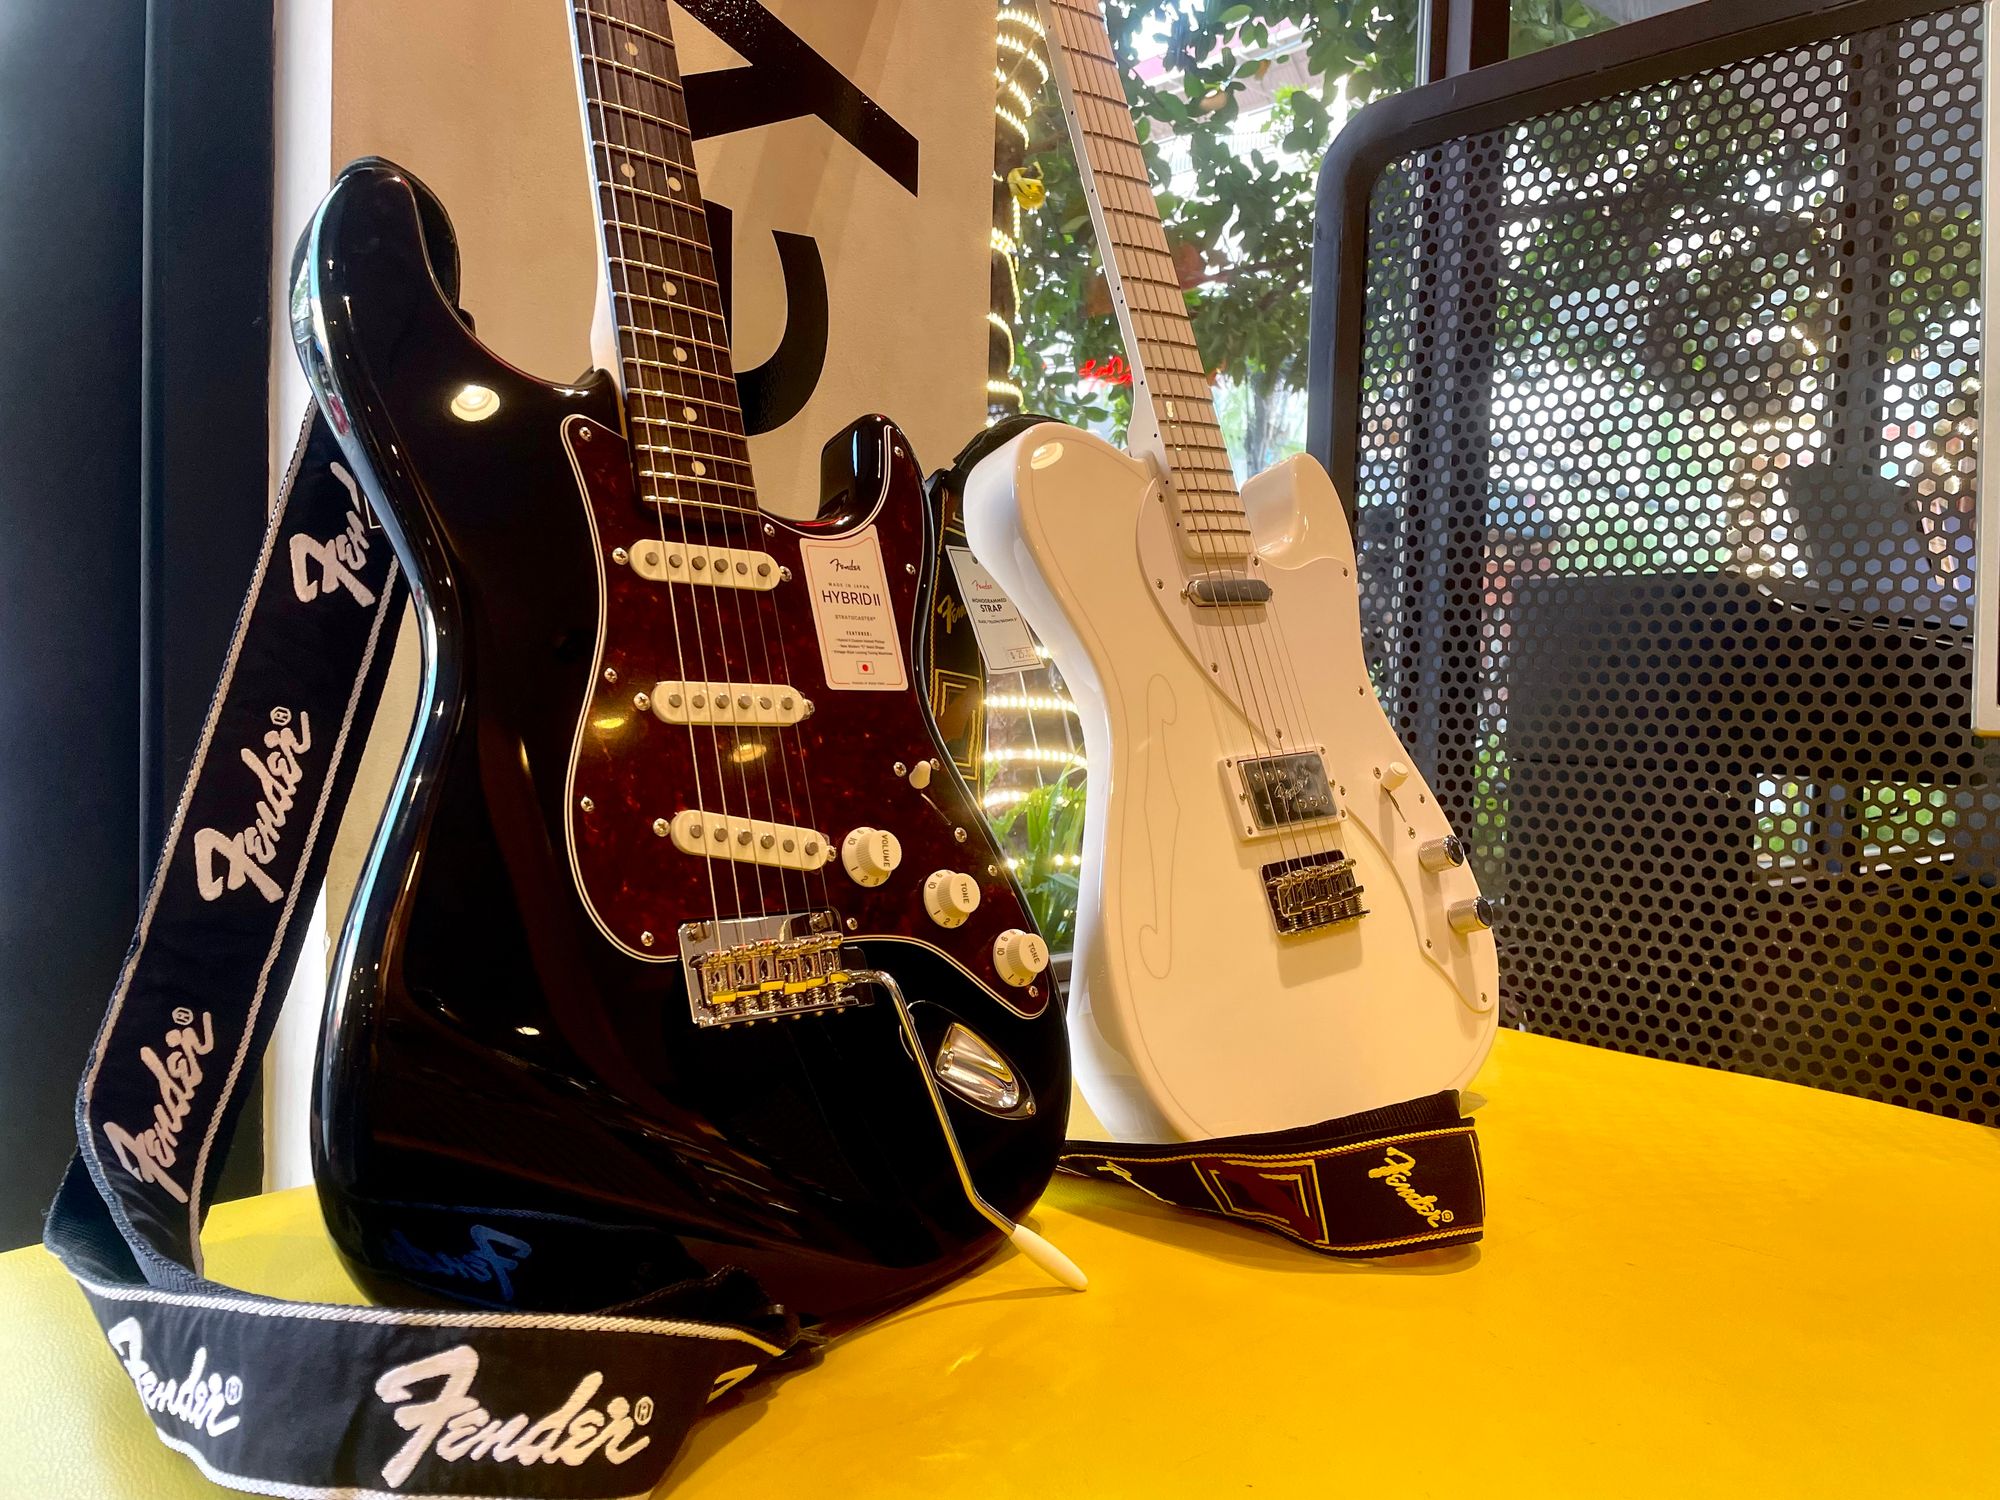 Stratocaster And Telecaster: What's the Difference?